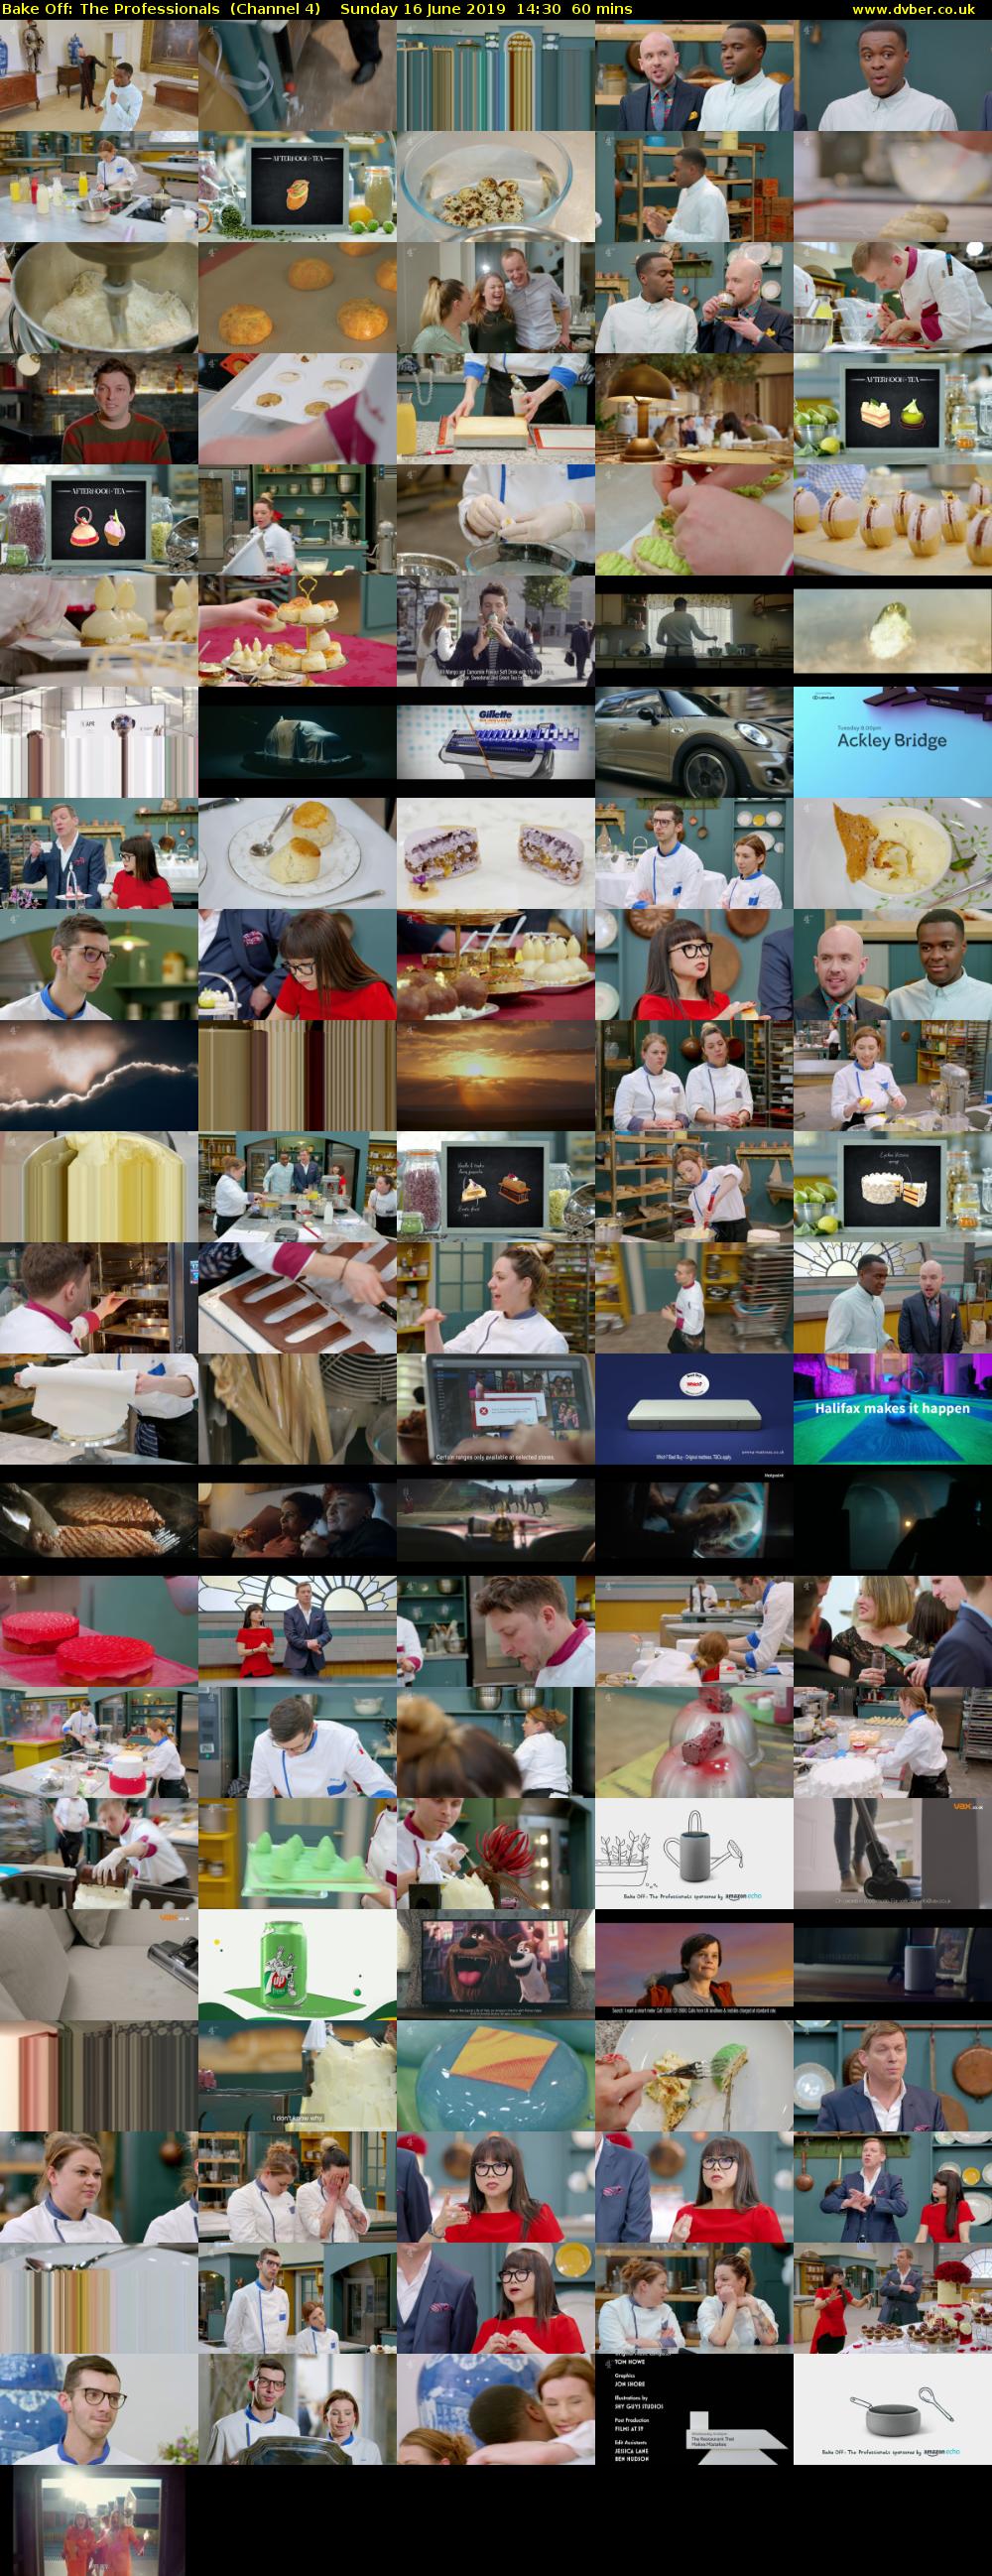 Bake Off: The Professionals  (Channel 4) Sunday 16 June 2019 14:30 - 15:30